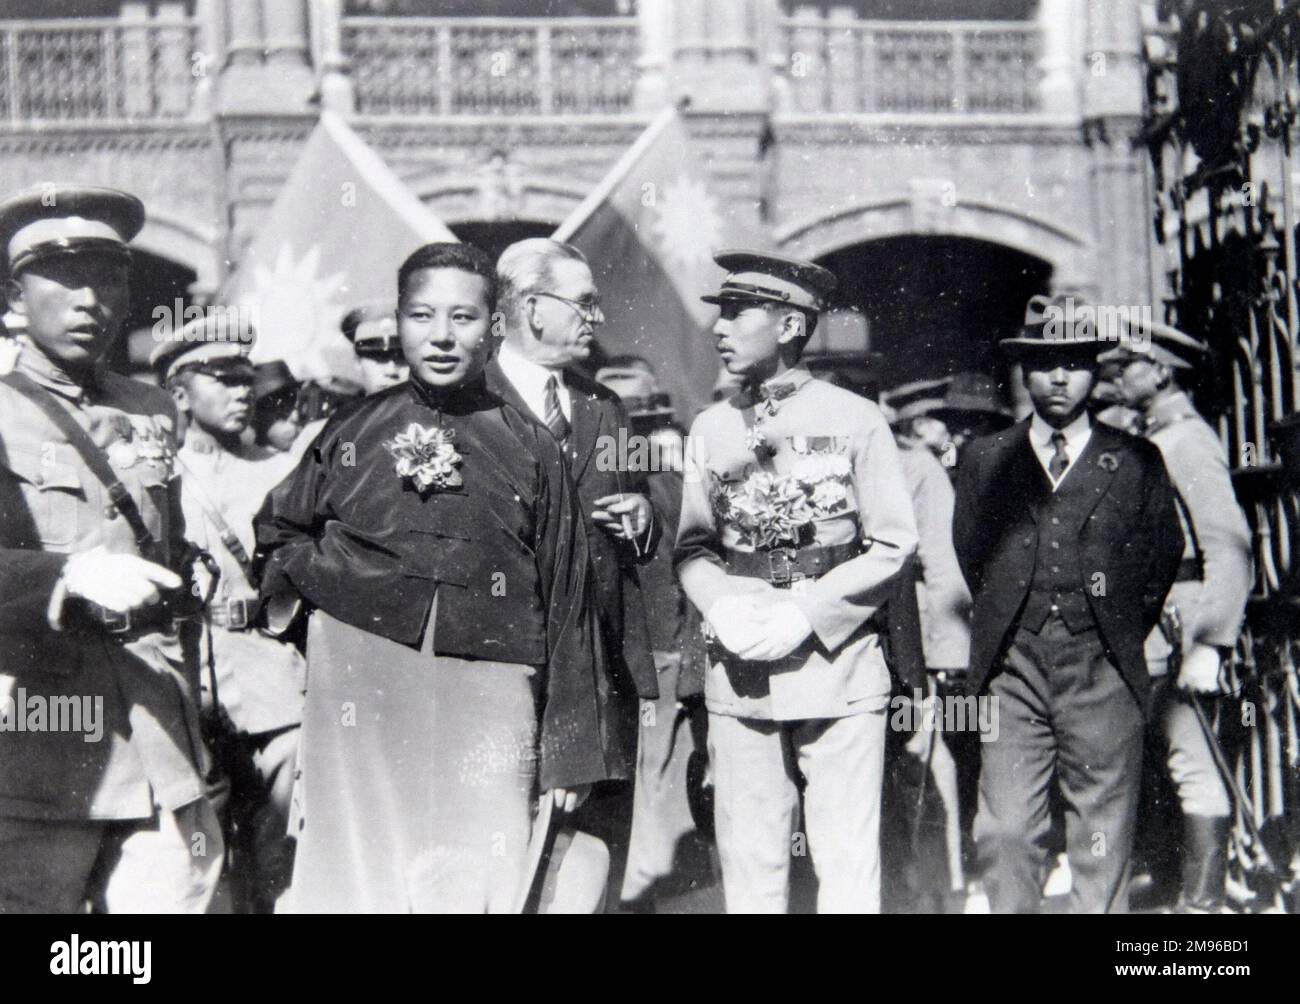 The local military chief, with others, some in uniform, others in civilian dress, somewhere in the Far East.  There is one Western man, perhaps a diplomat, talking to the chief.  The flags in the background seem to be those of the Republic of China (Taiwan). Stock Photo